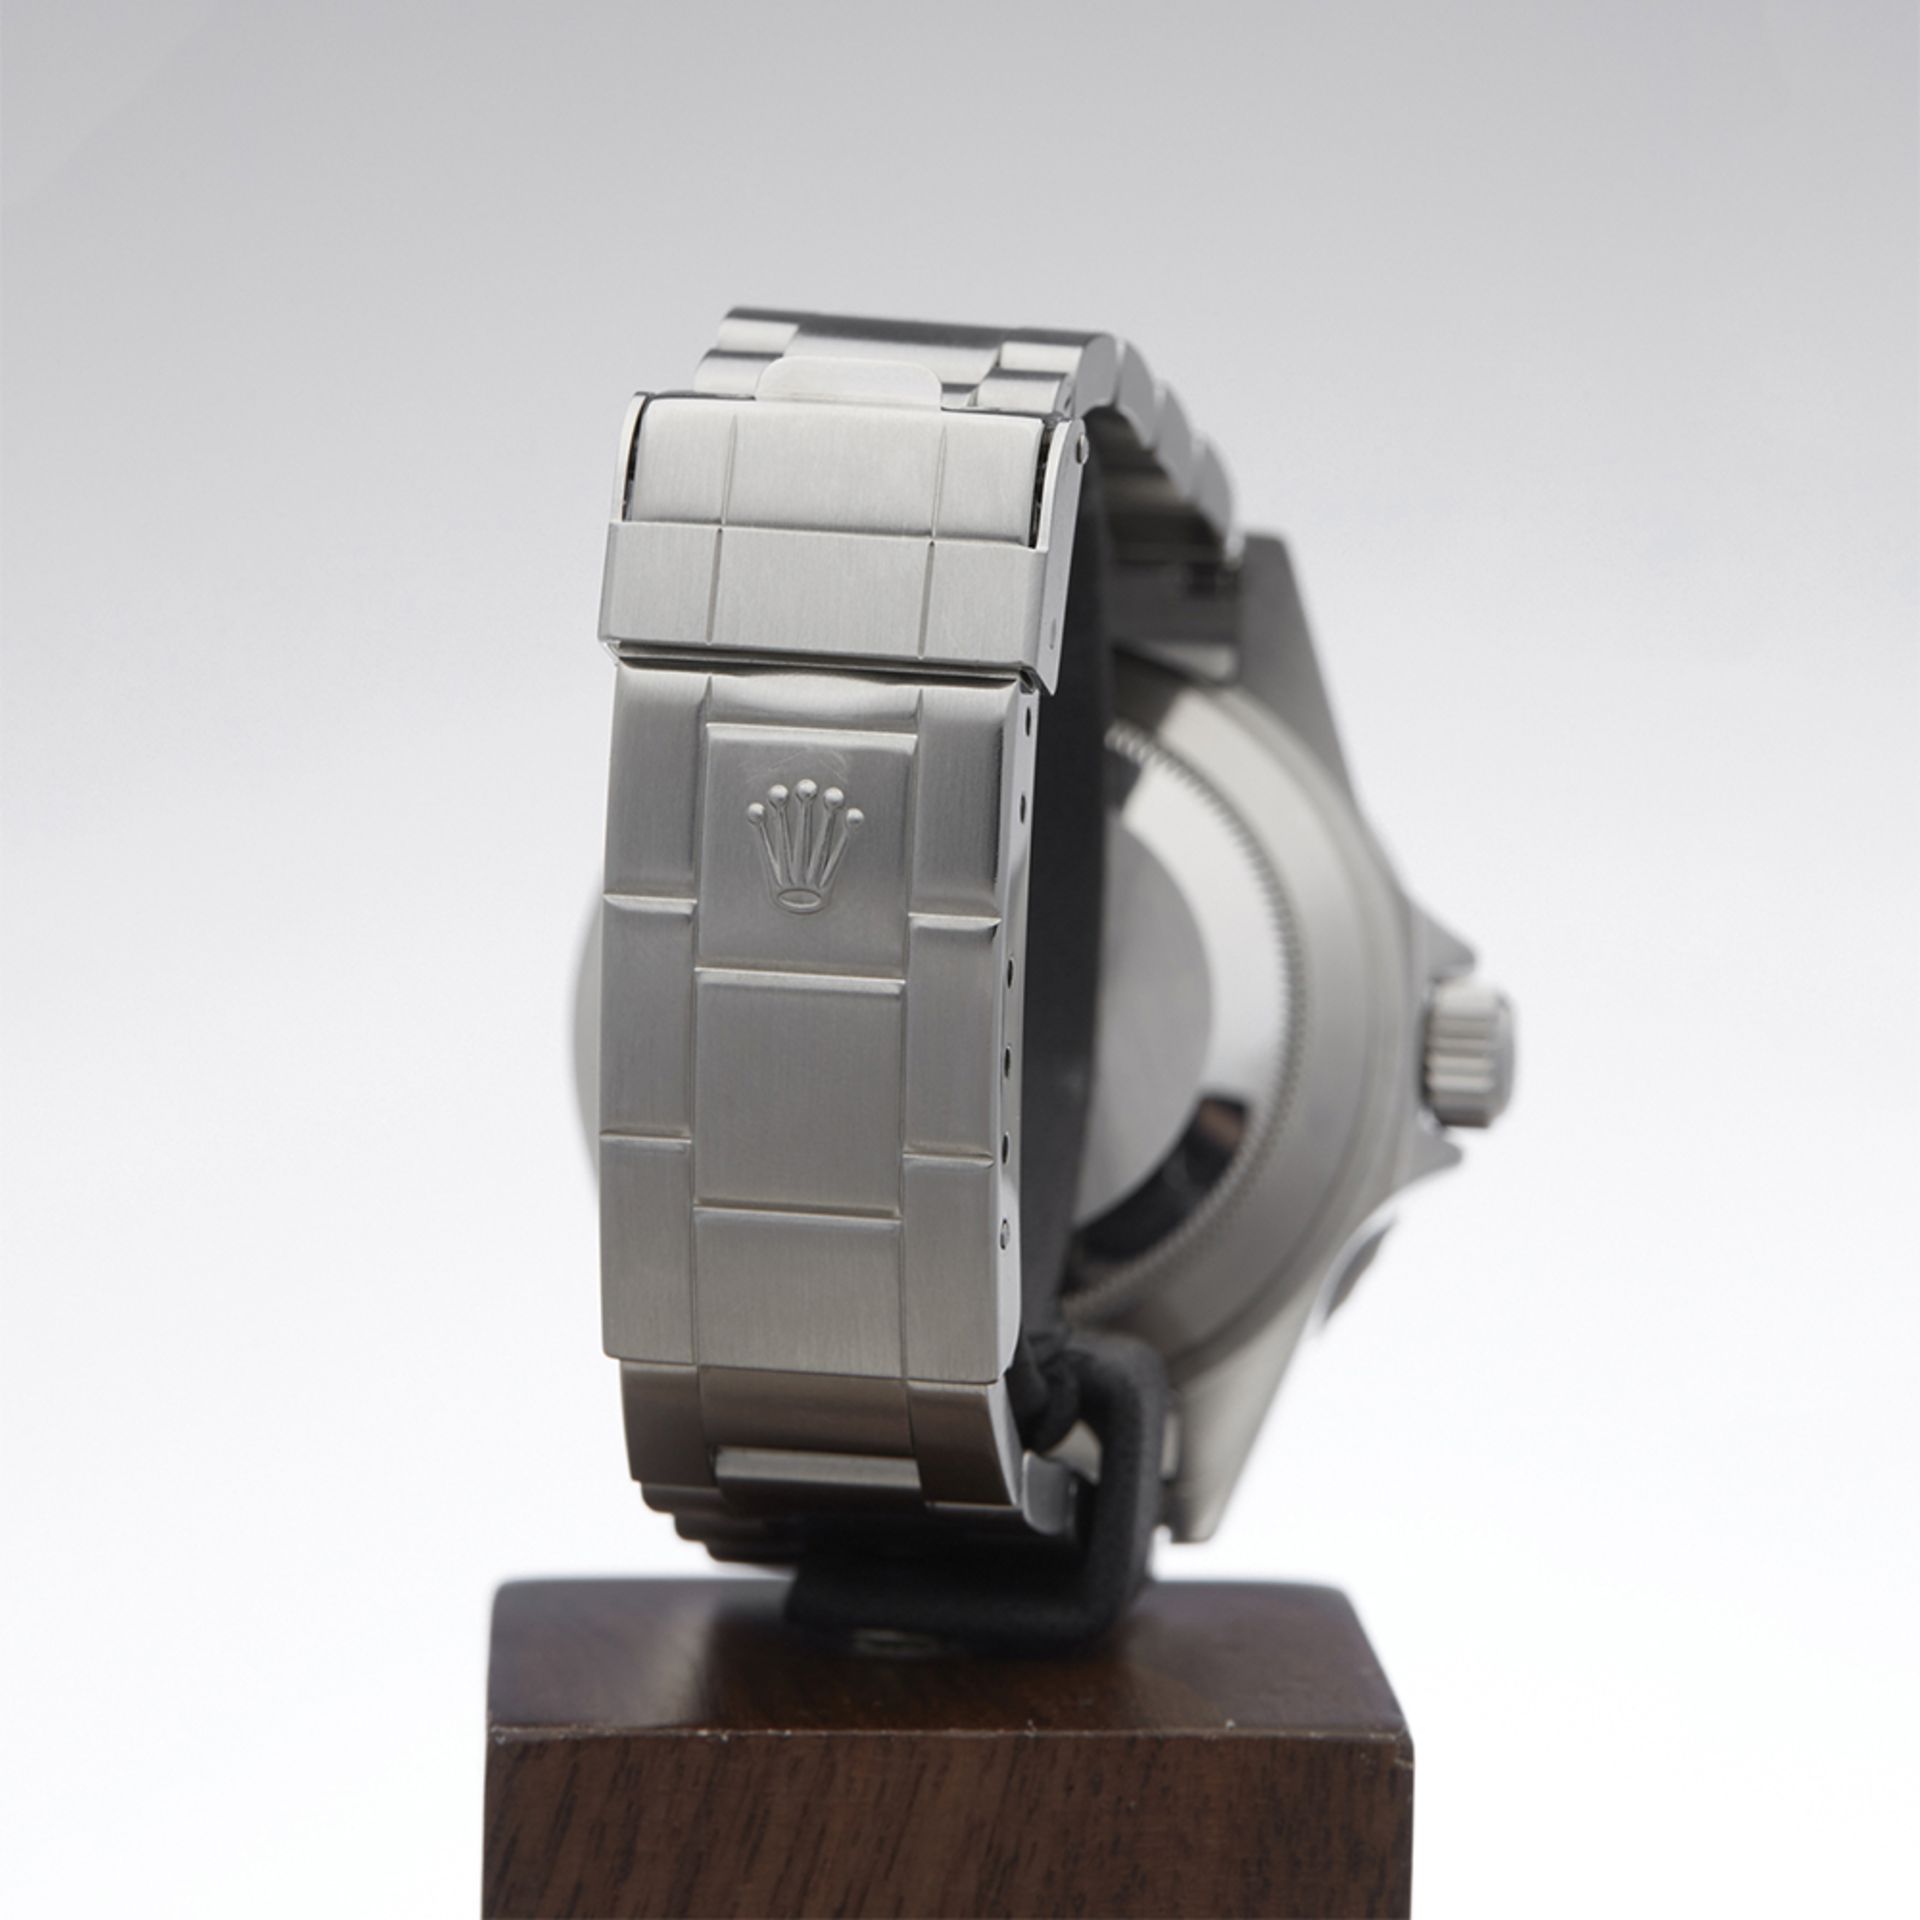 Submariner 40mm Stainless Steel - 16610LN - Image 7 of 9